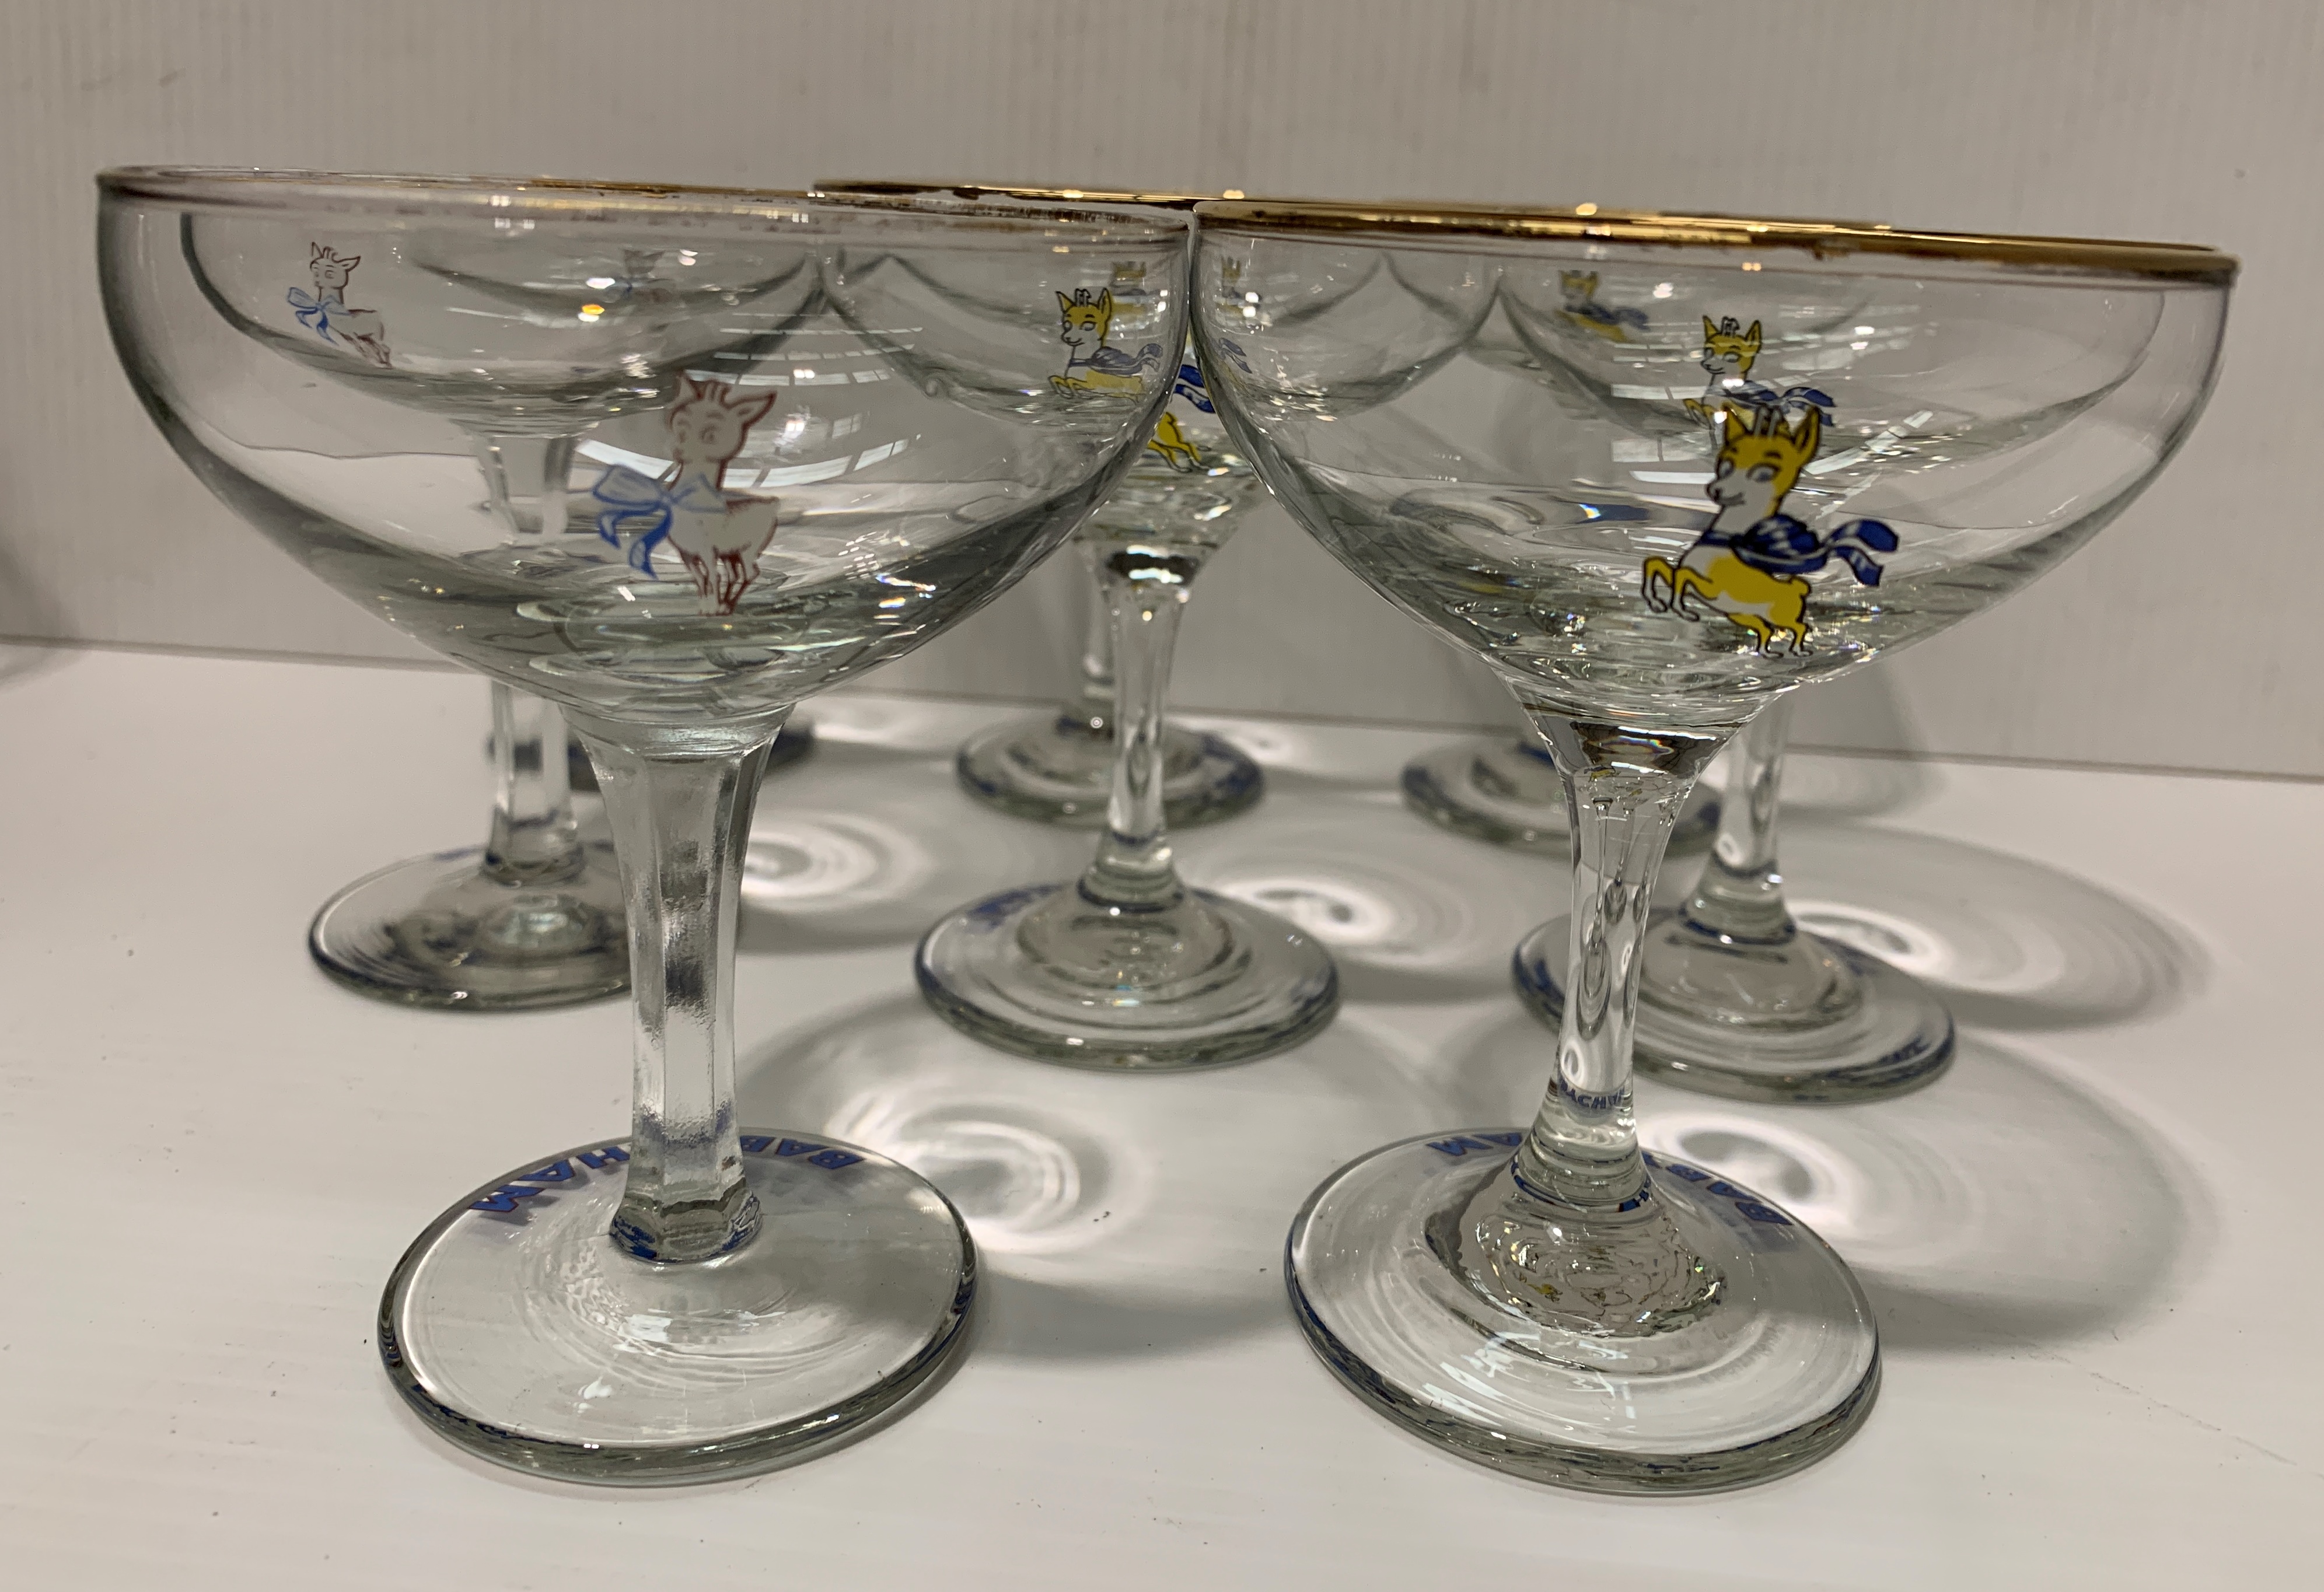 Eight Babycham glasses - five with the yellow leaping deer and three with the white standing deer - Image 2 of 3